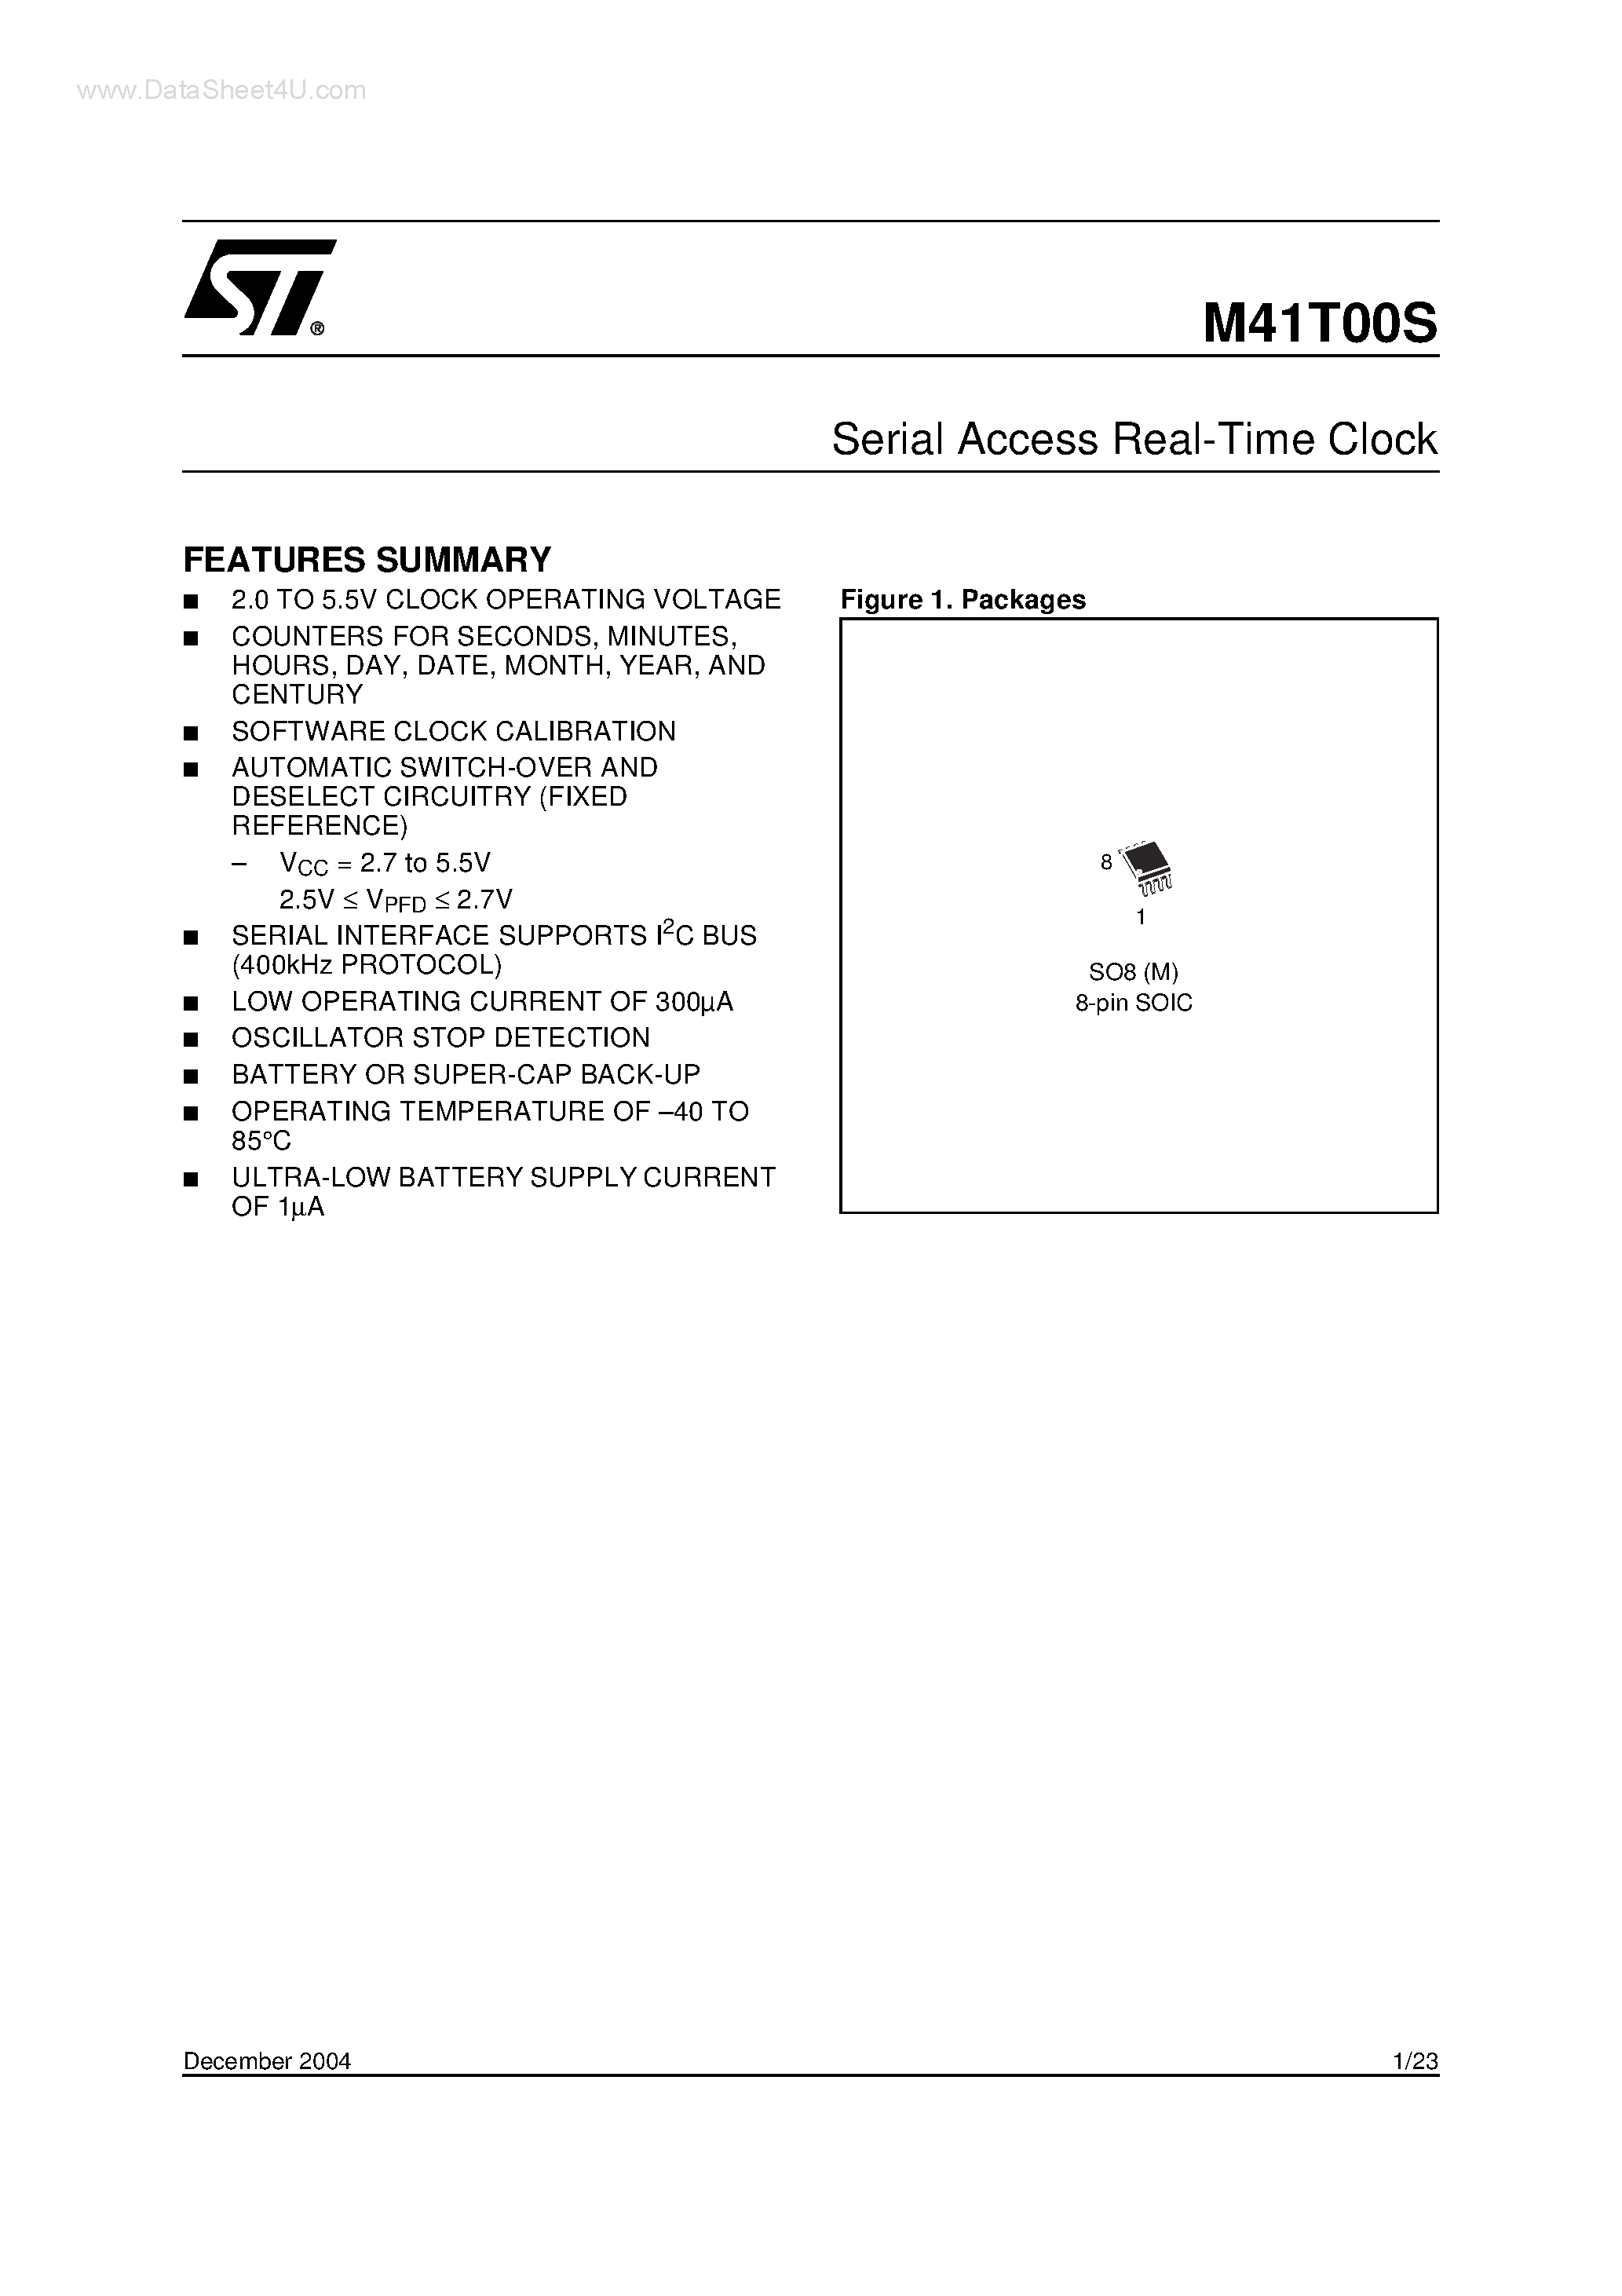 Datasheet M41T00S - Serial Access Real-Time Clock page 1